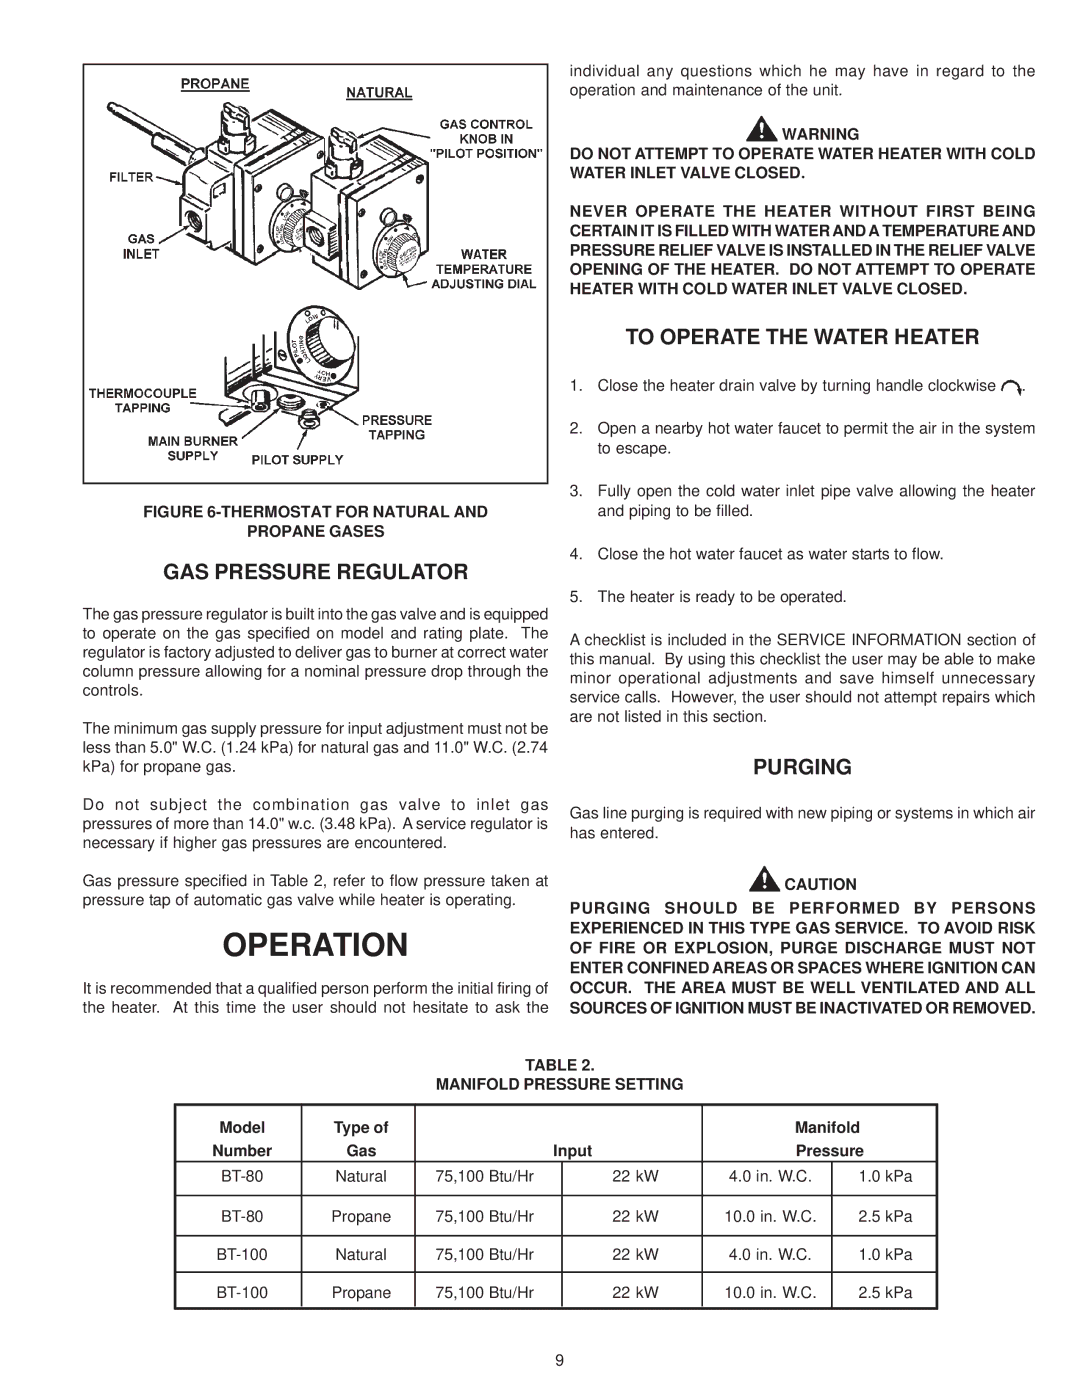 A.O. Smith BT- 80 warranty GAS Pressure Regulator, To Operate the Water Heater, Purging 